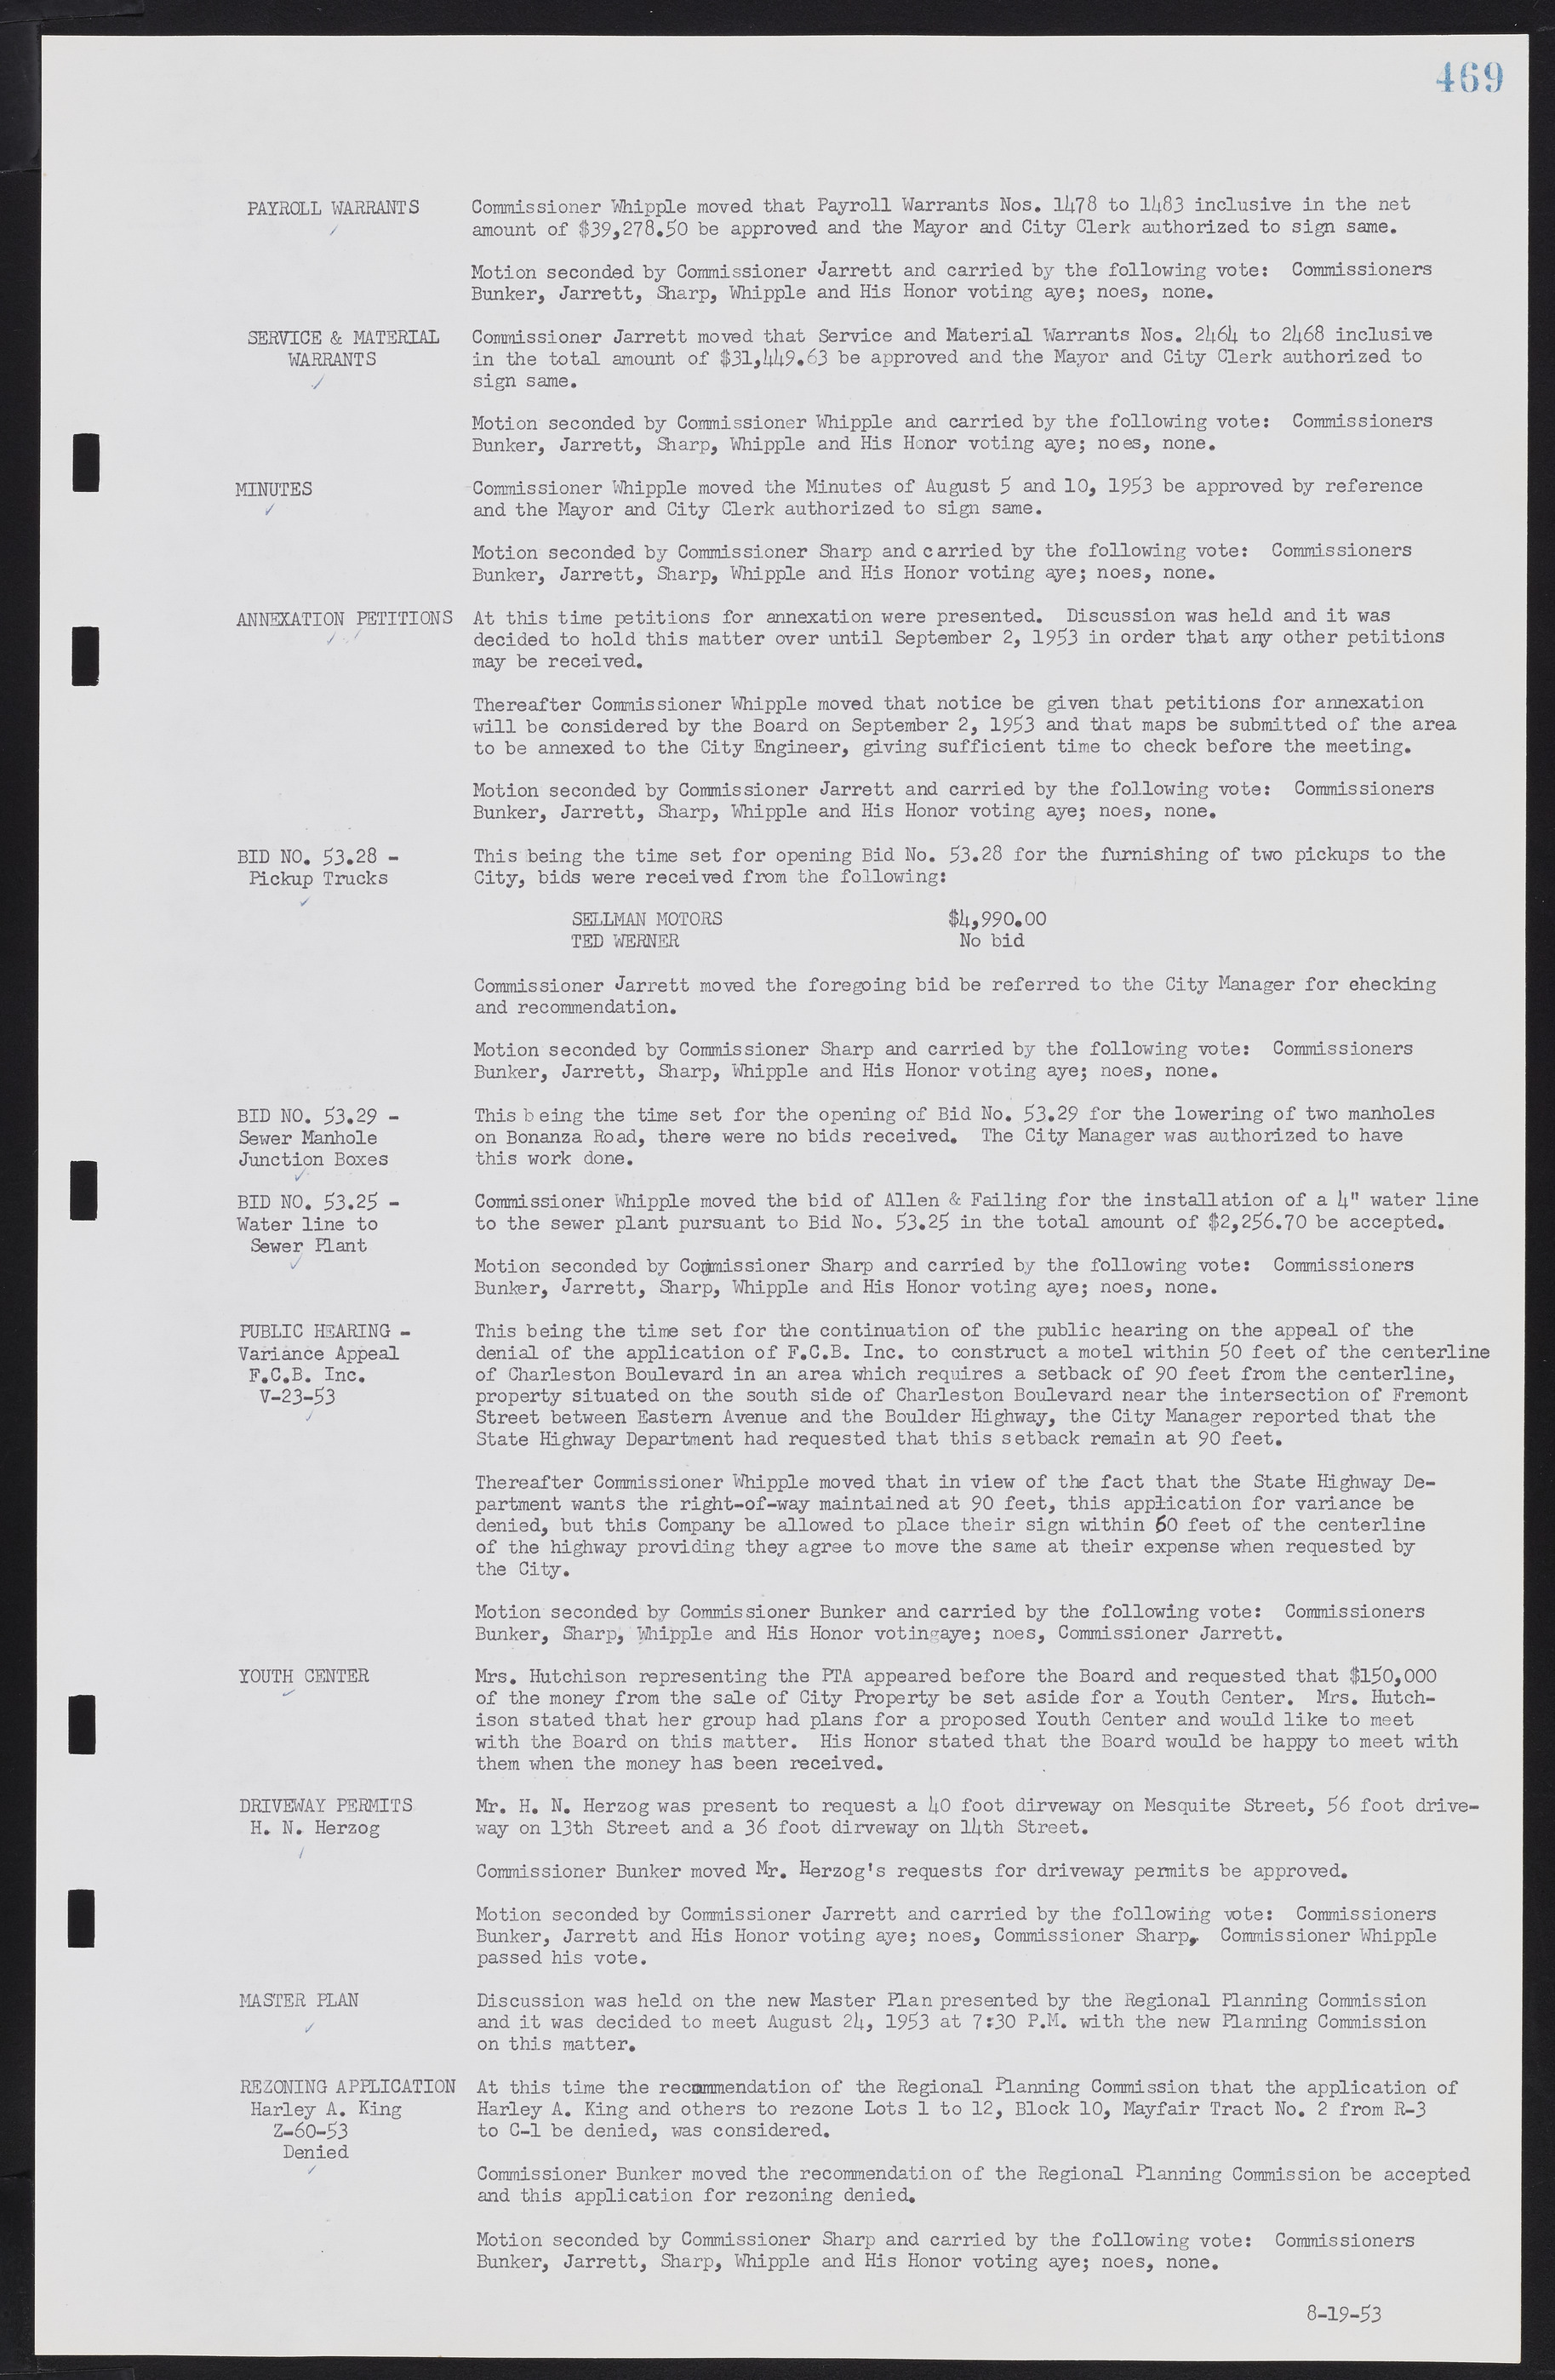 Las Vegas City Commission Minutes, May 26, 1952 to February 17, 1954, lvc000008-499